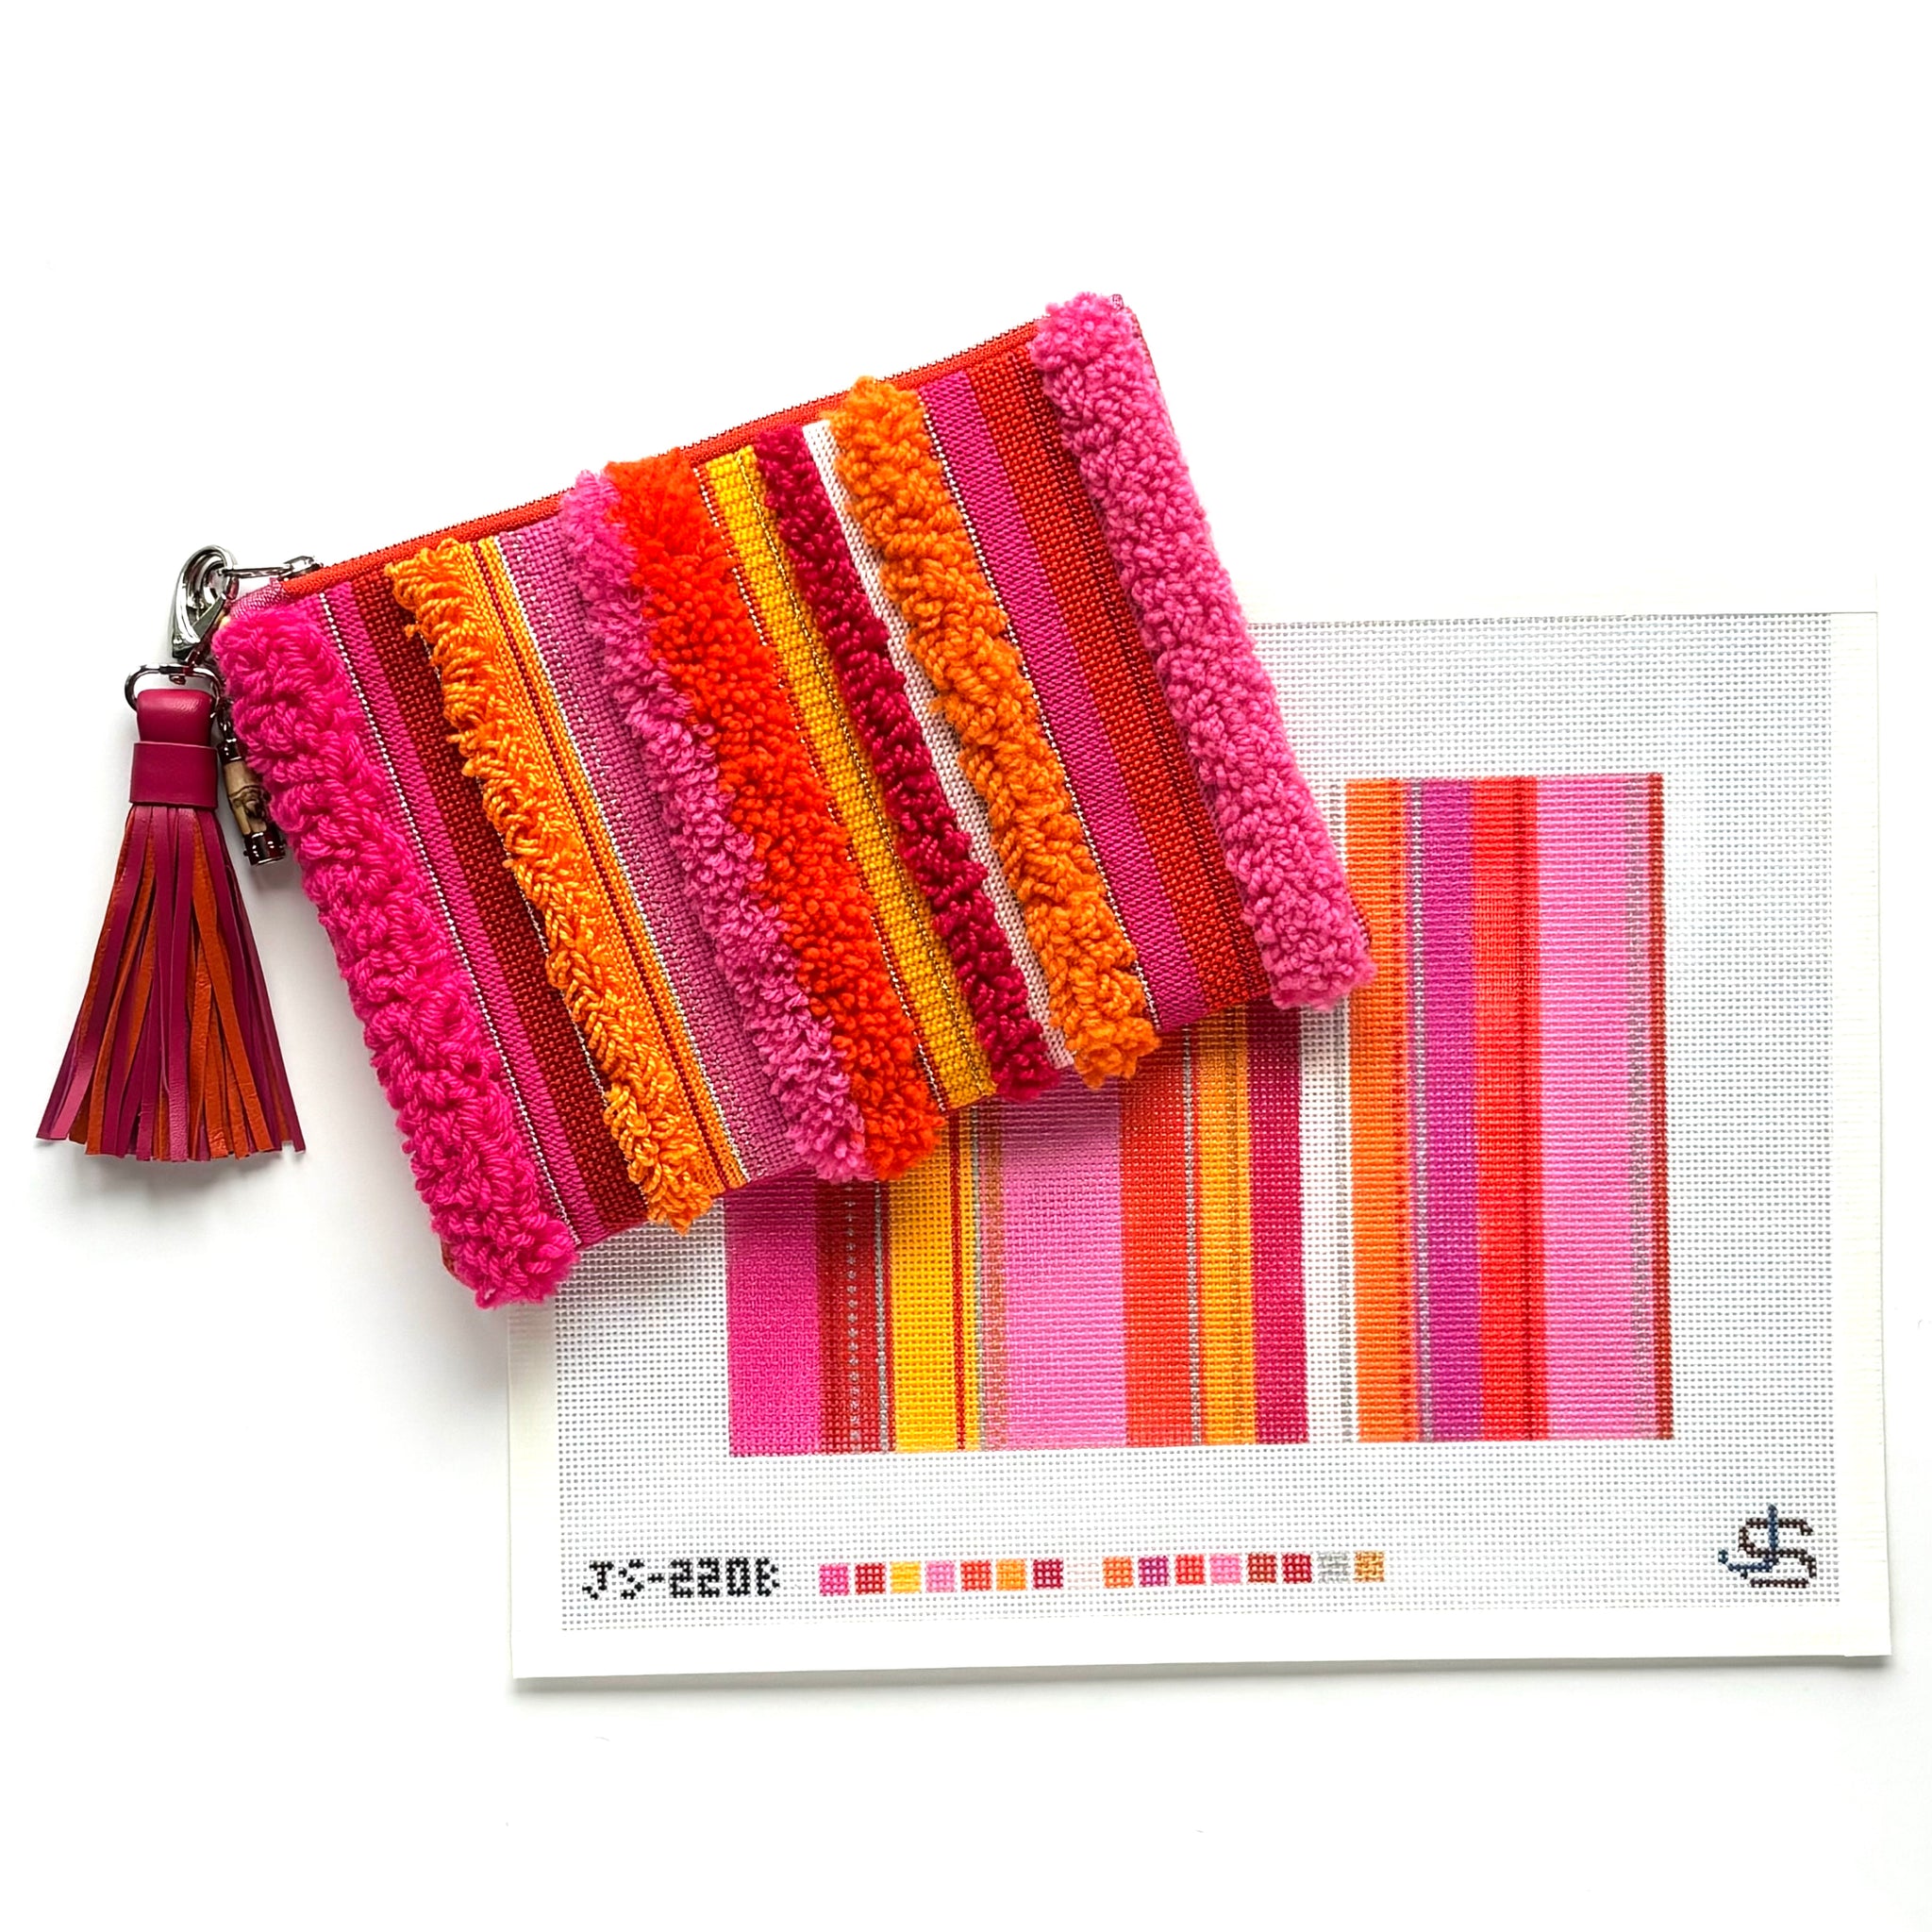 Tufted Stripe Clutch Needlepoint Canvas - Pink and Orange